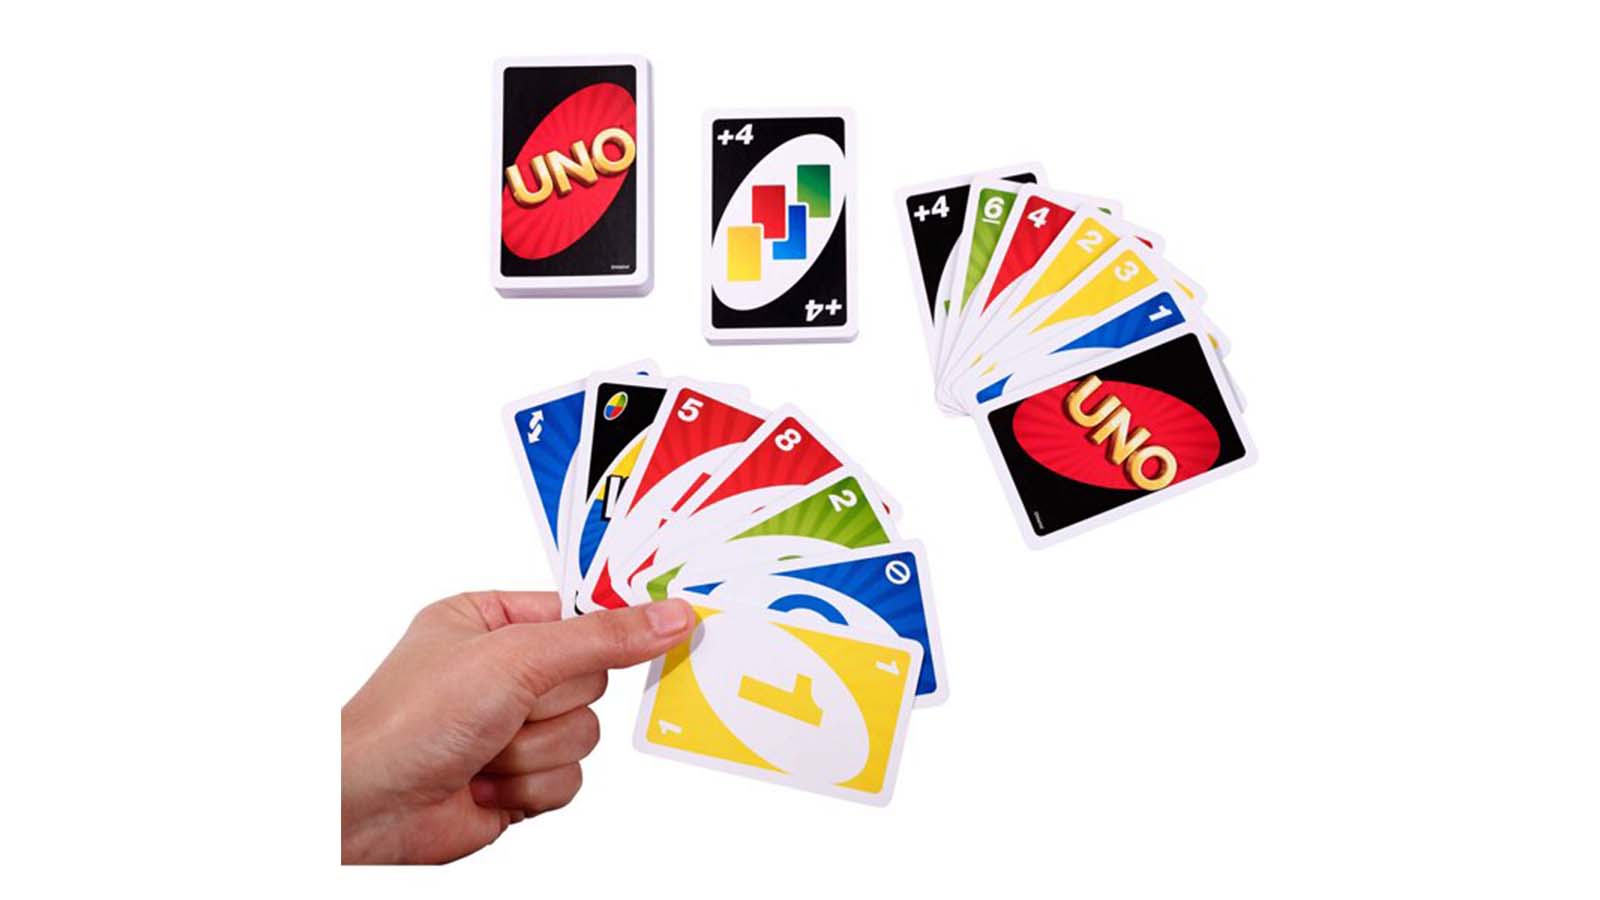 Travel Game - Uno